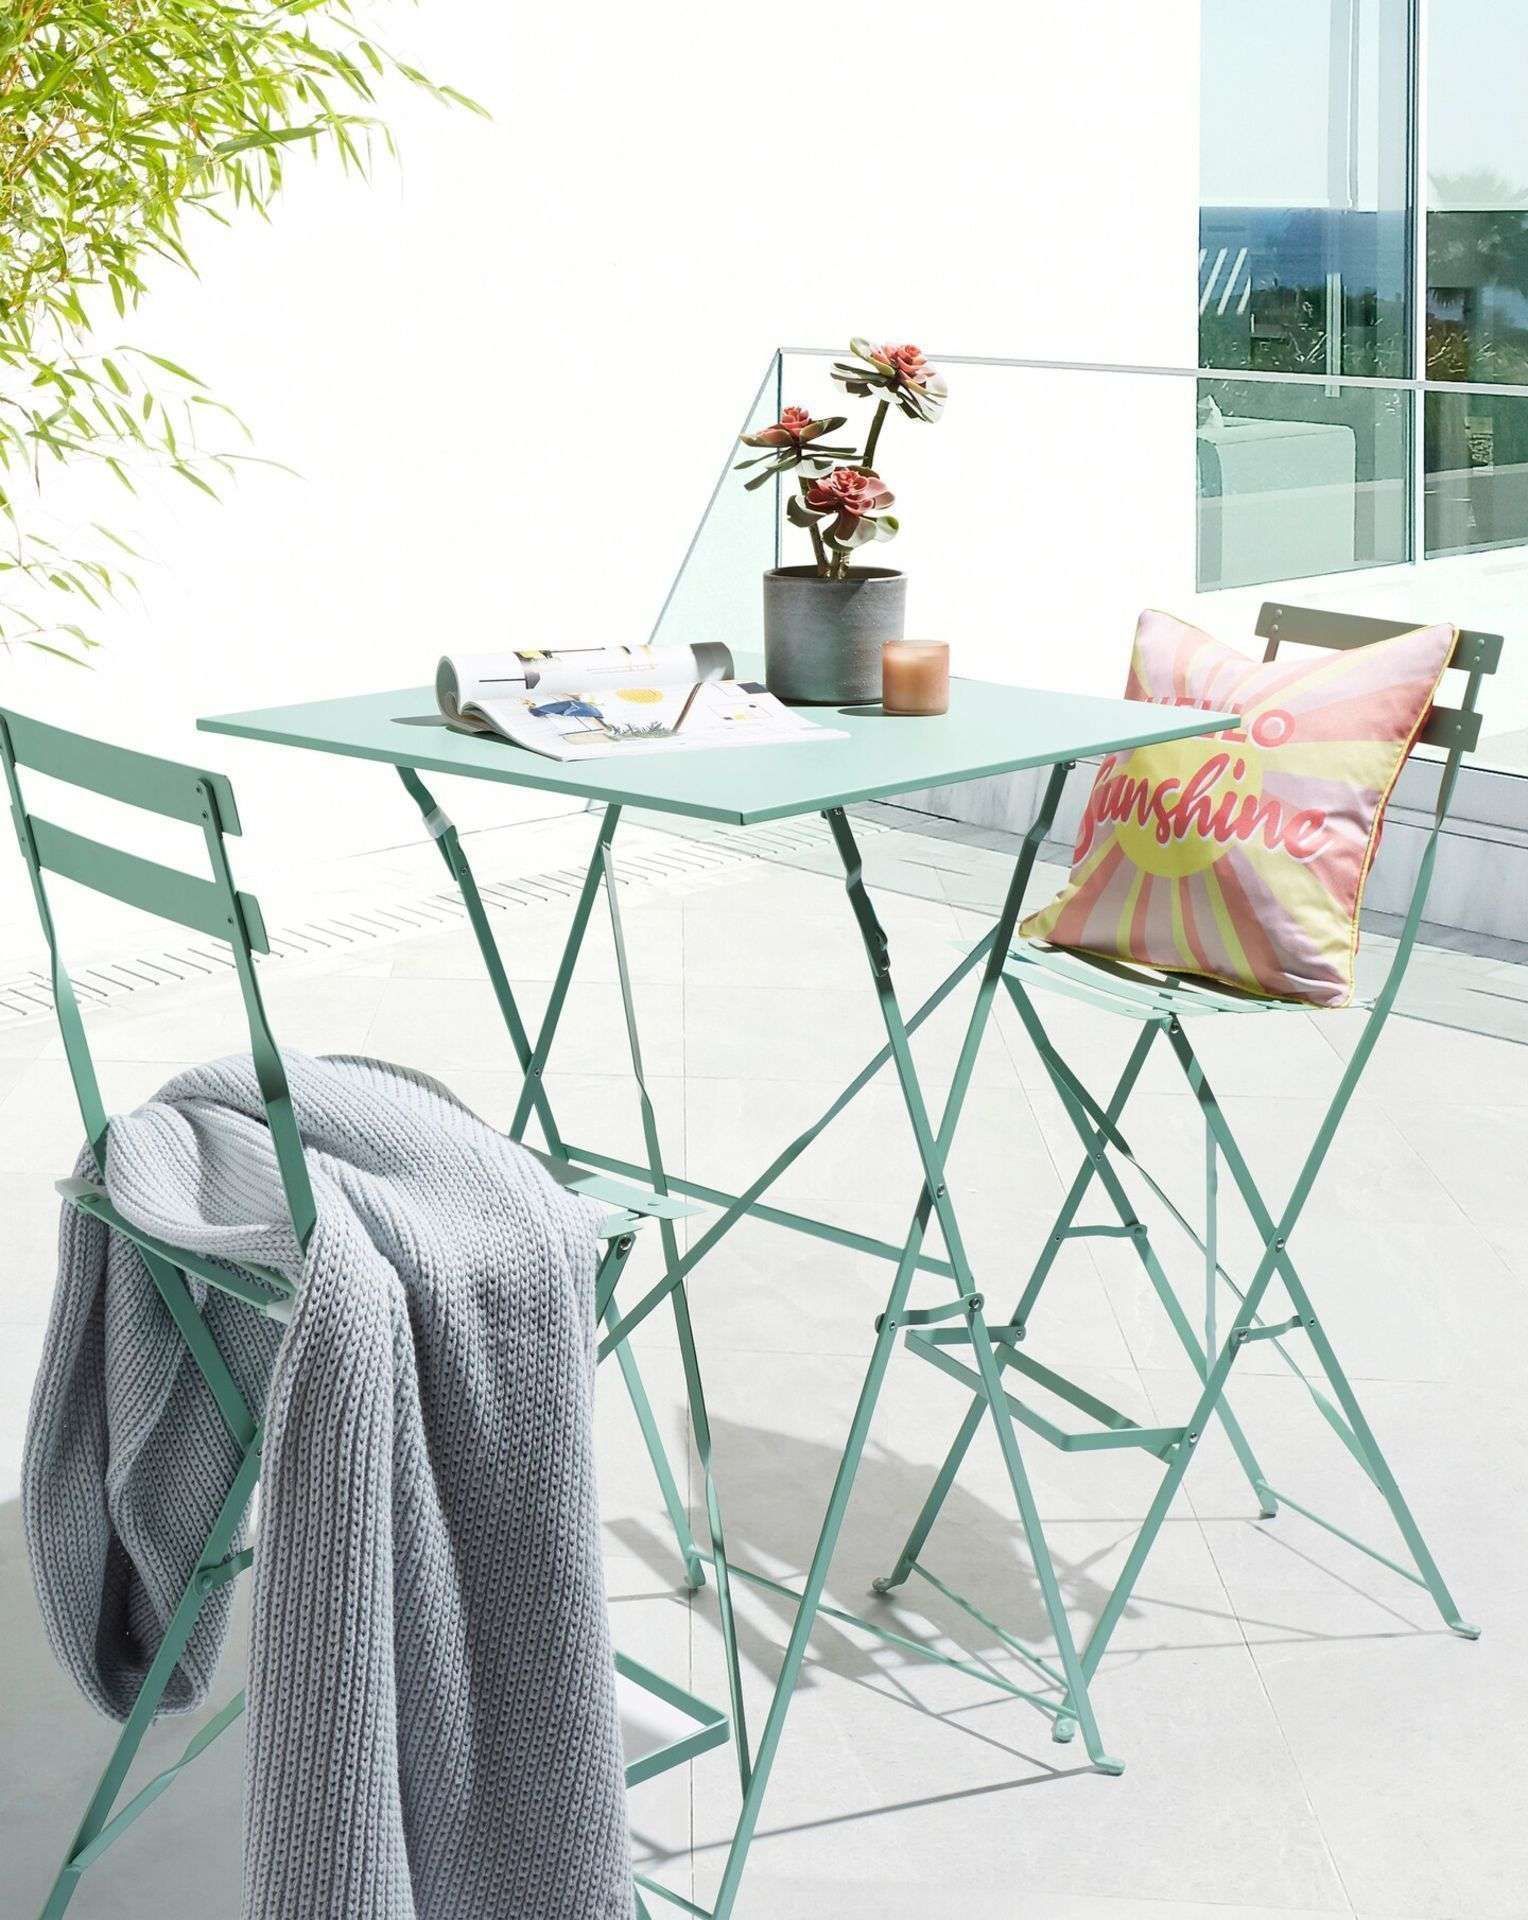 TRADE PALLET TO CONTAIN 6x BRAND NEW Palma Bistro Bar Set GREEN. RRP £159 EACH. Liven up your